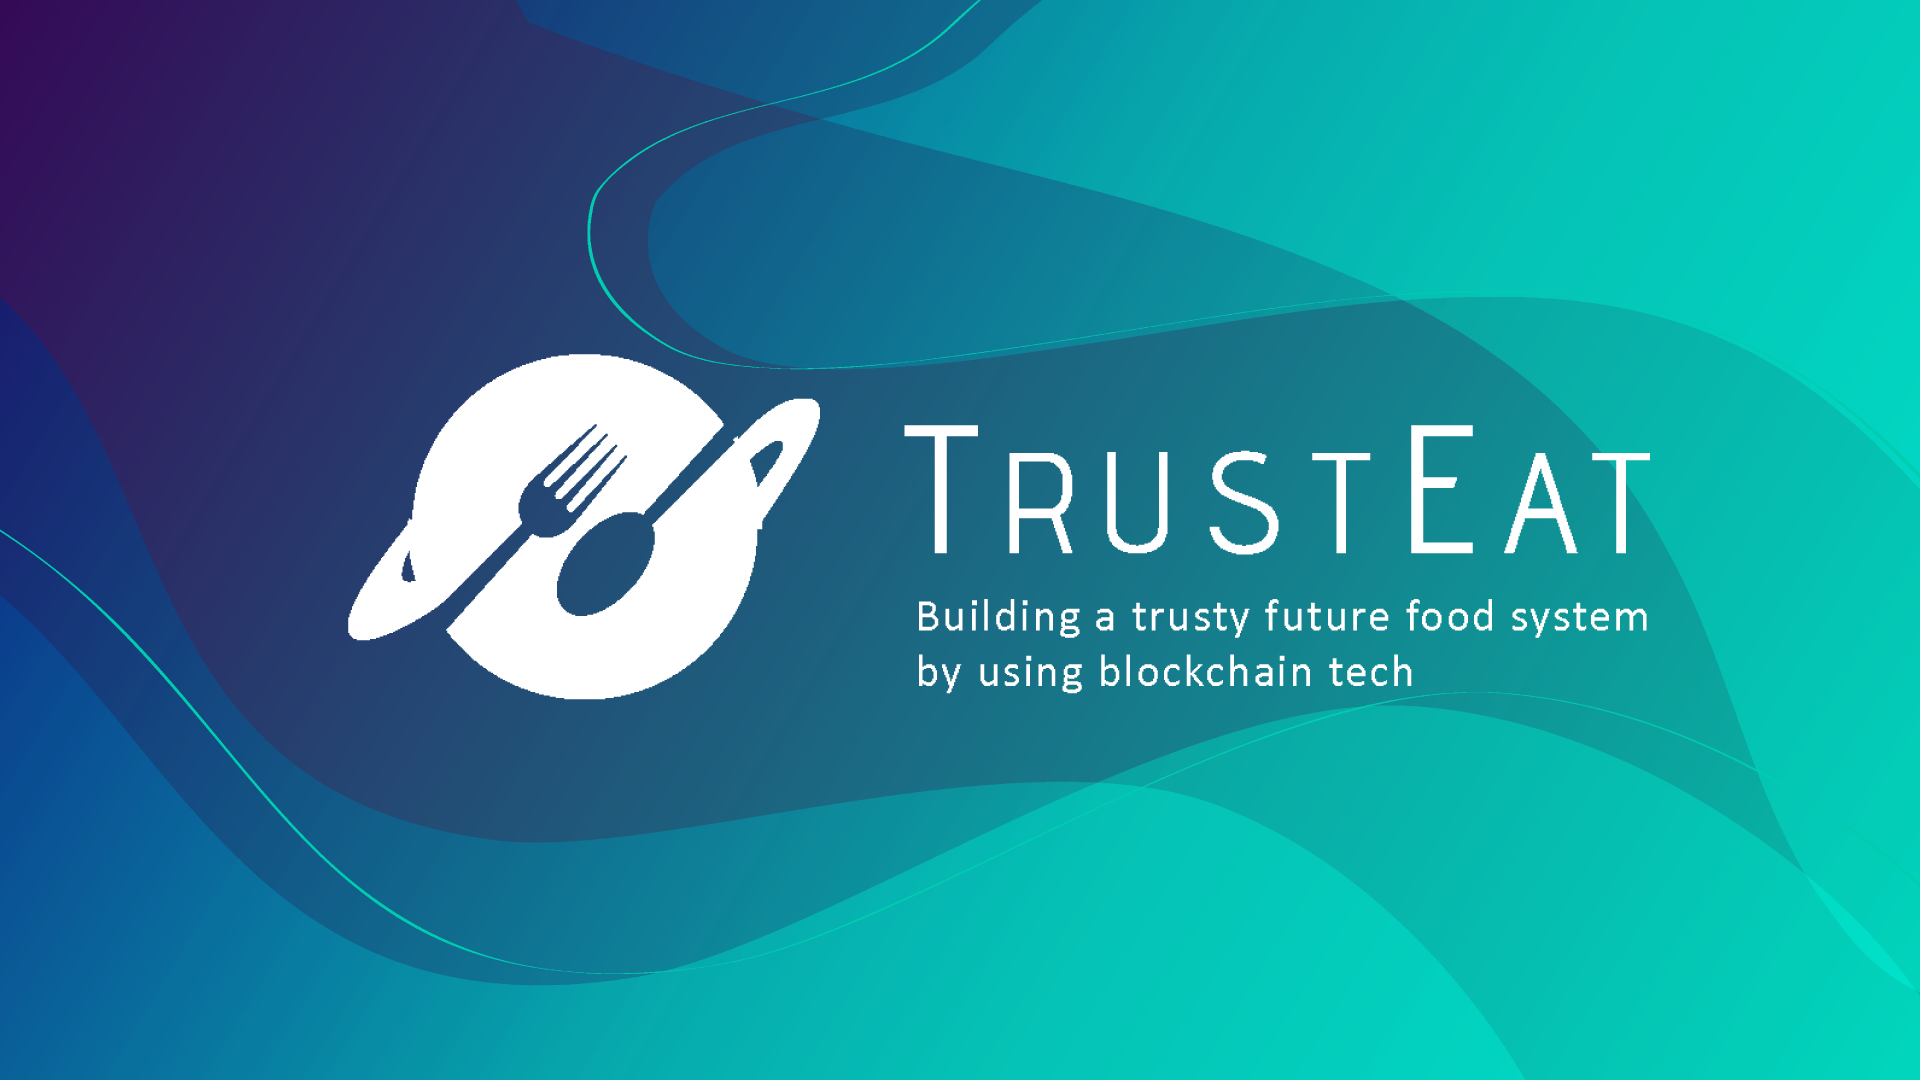 TrustEat applies blockchain to the food chain improving safety and traceability for the benefit of consumers